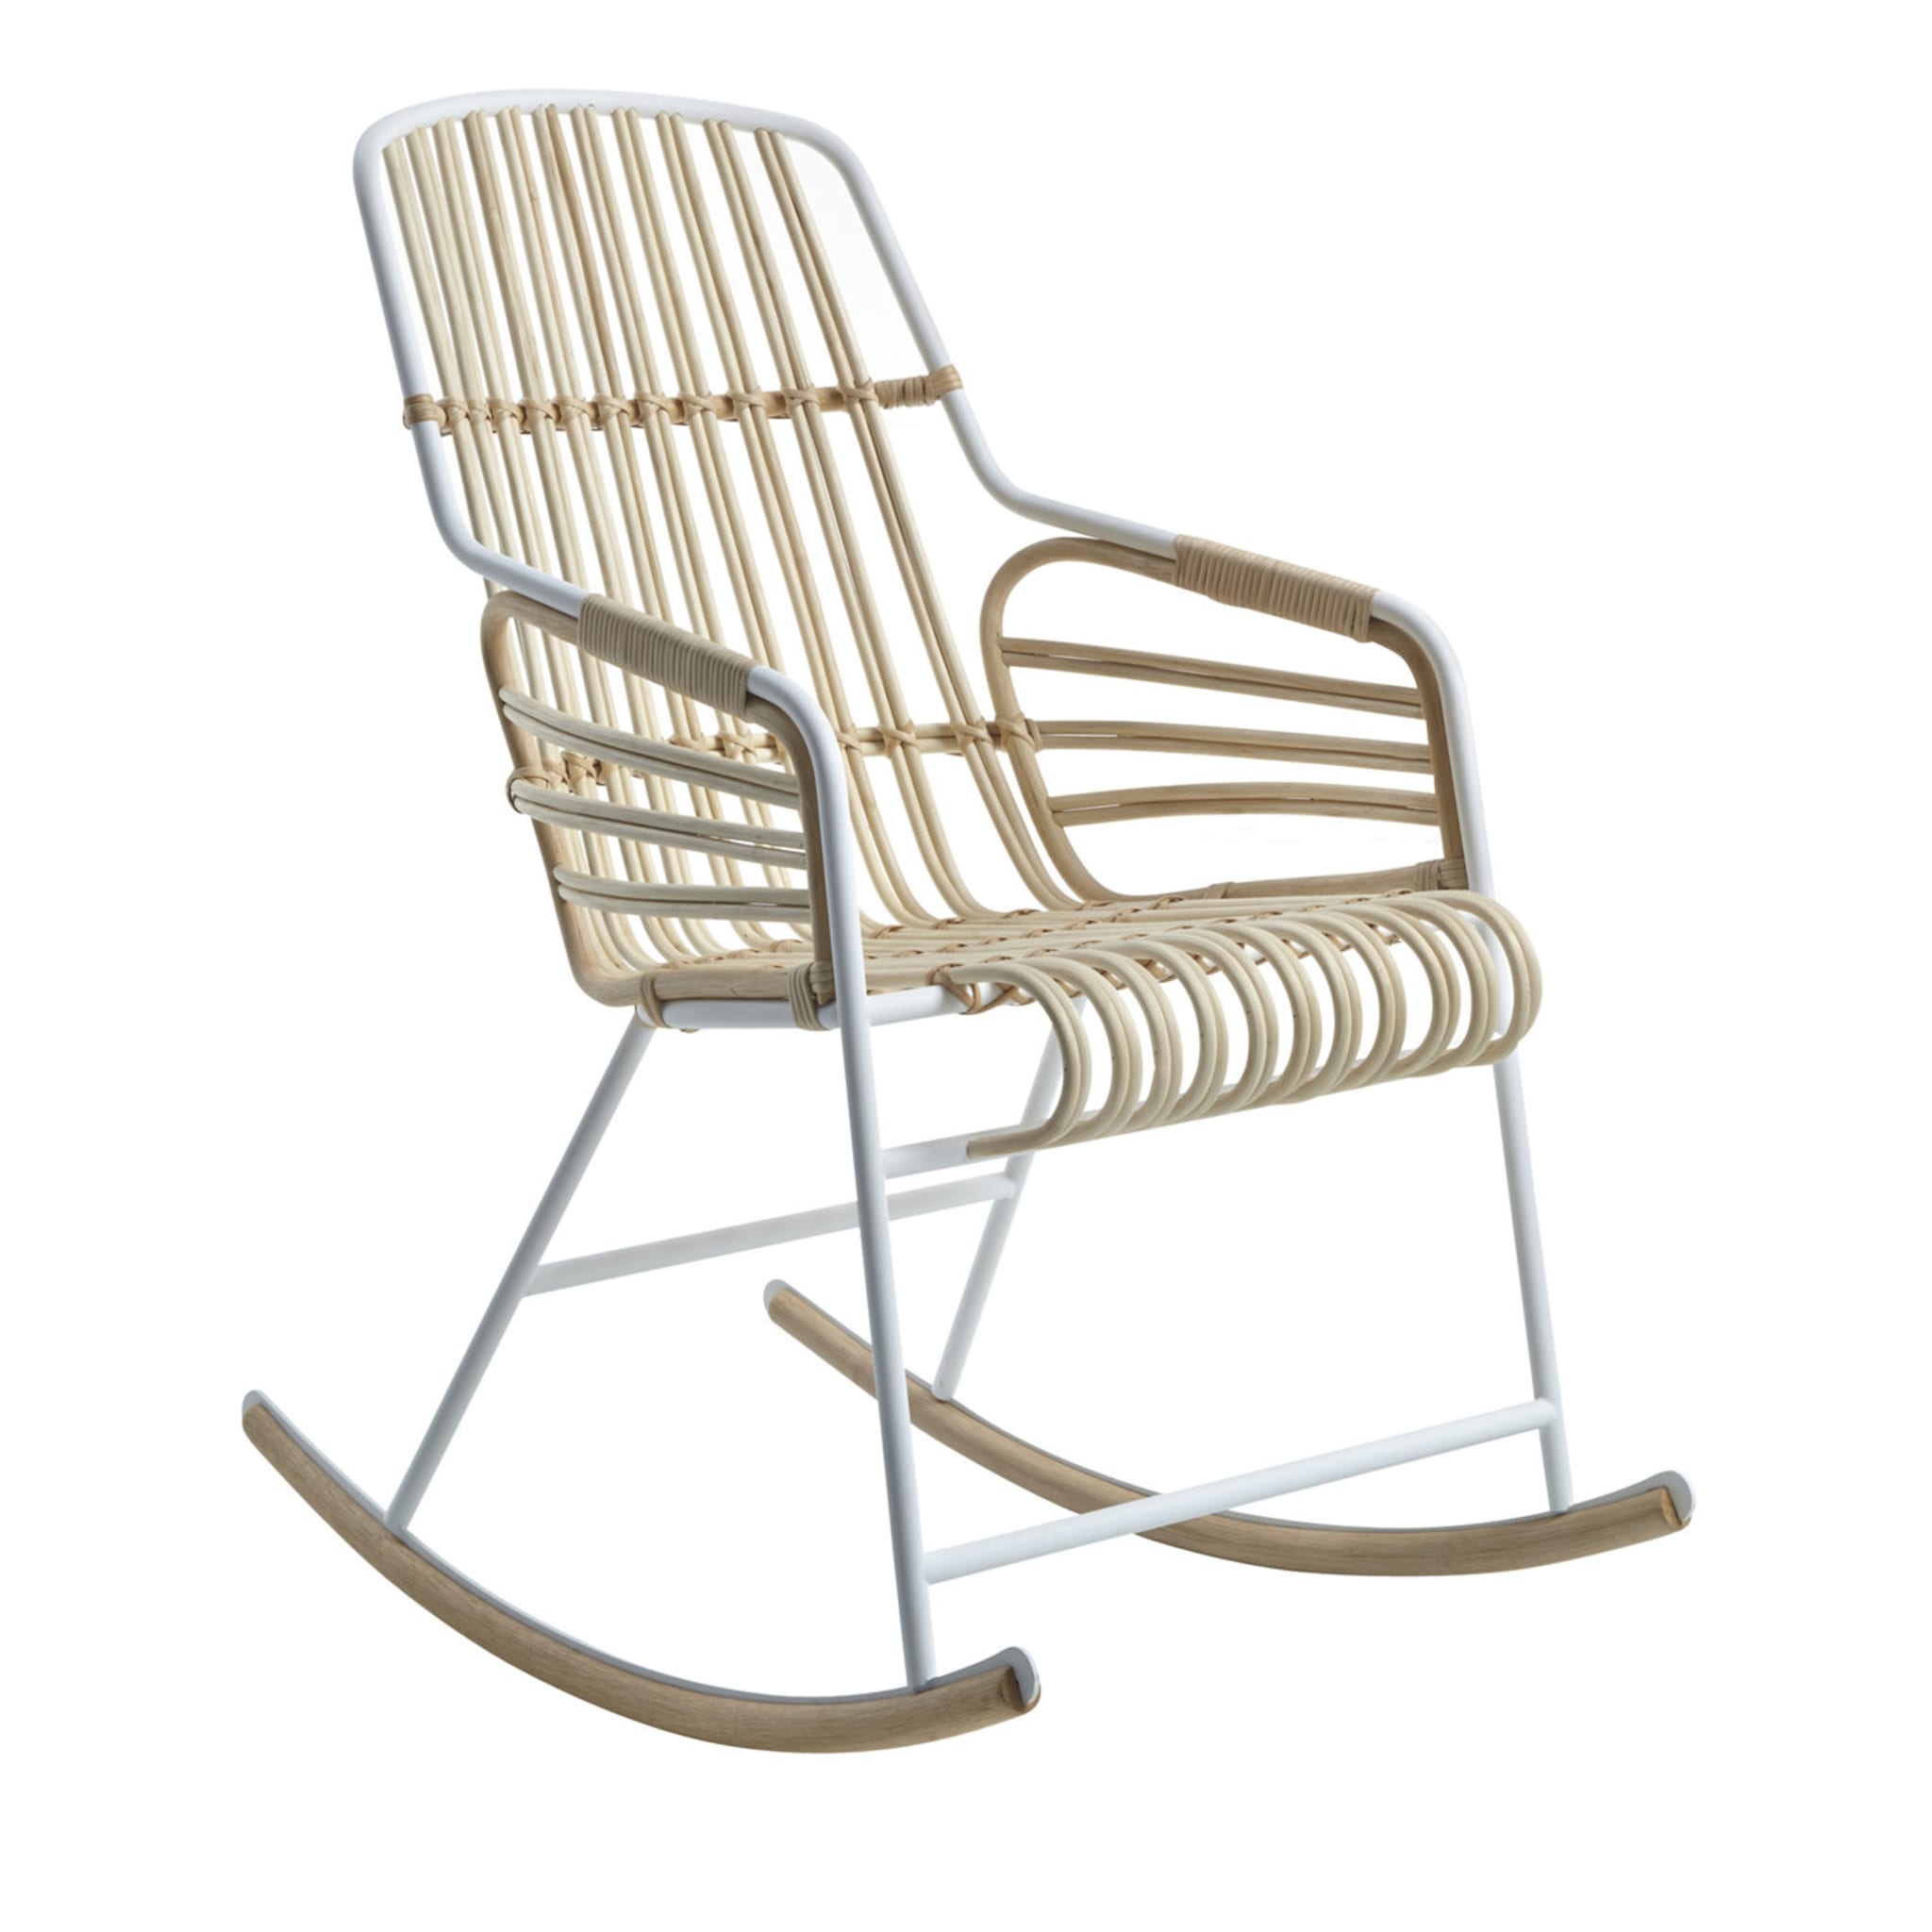 Raphia Rocking Chair by Lucidi Pevere - Main view